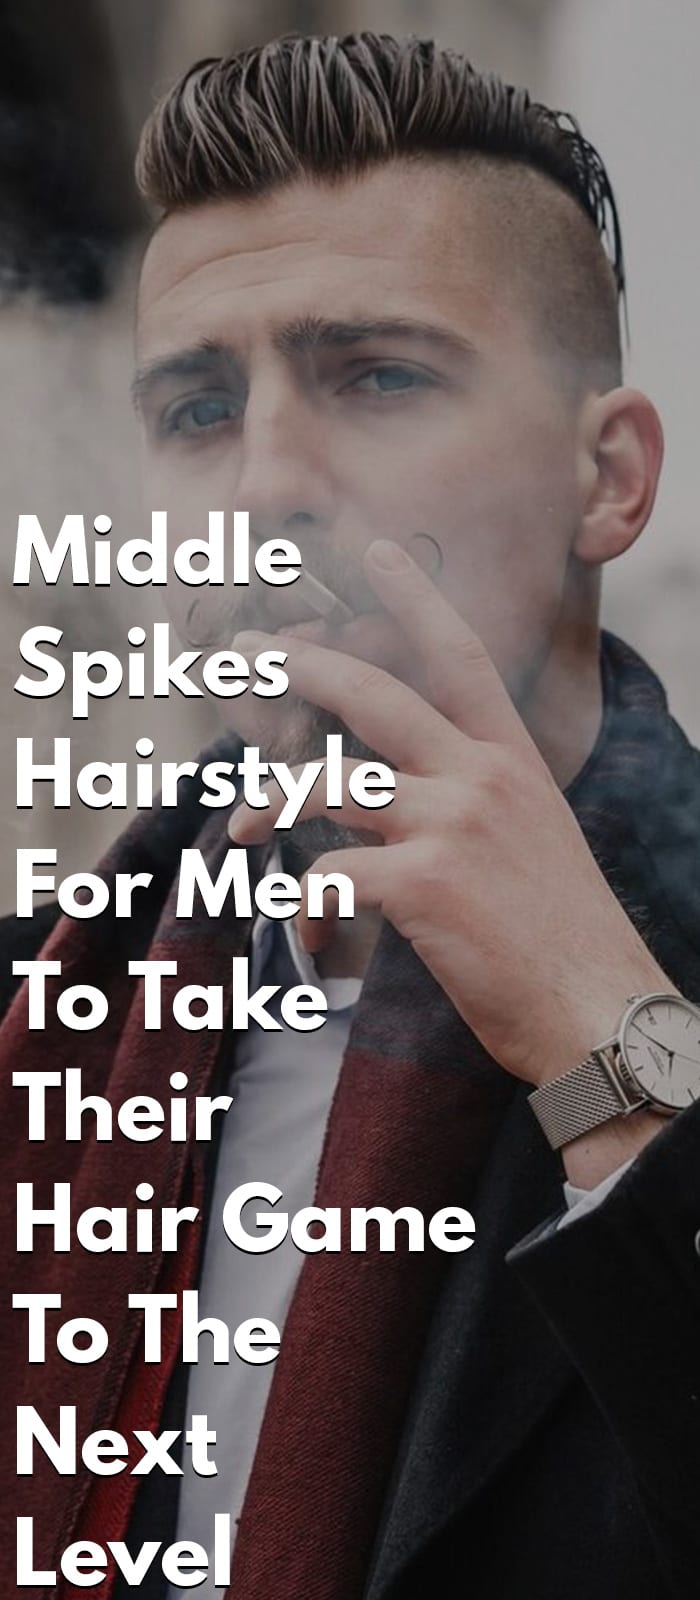 Middle Spikes Hairstyle For Men